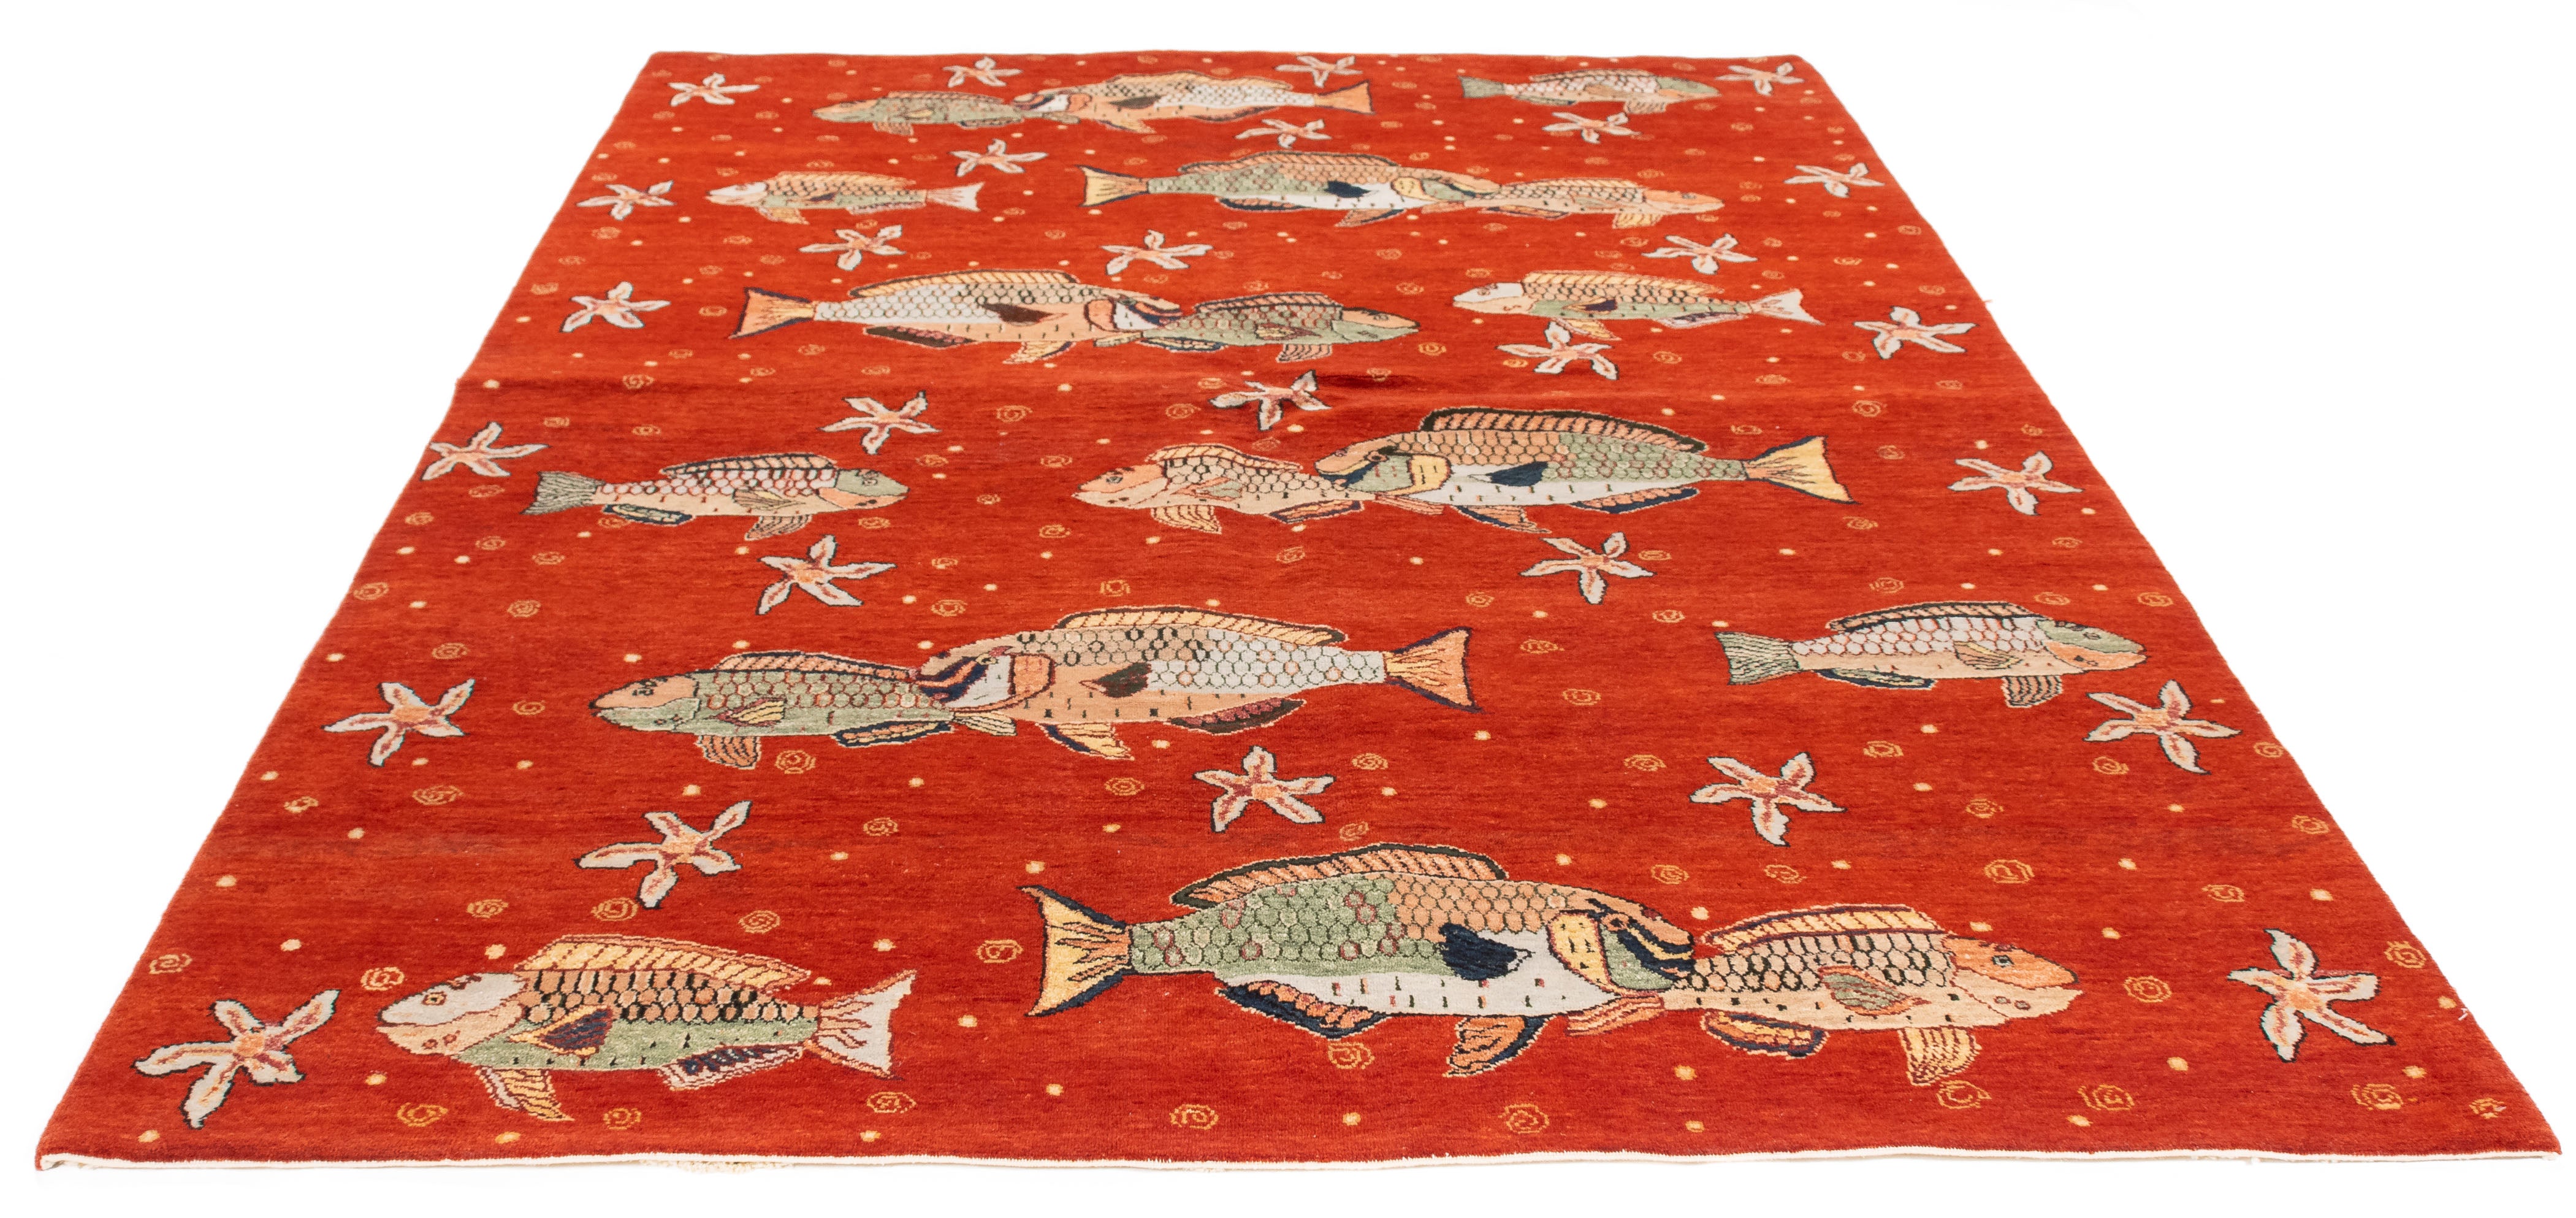 New Indian Coral Reef Design Rug <br> 6'1 x 8'11